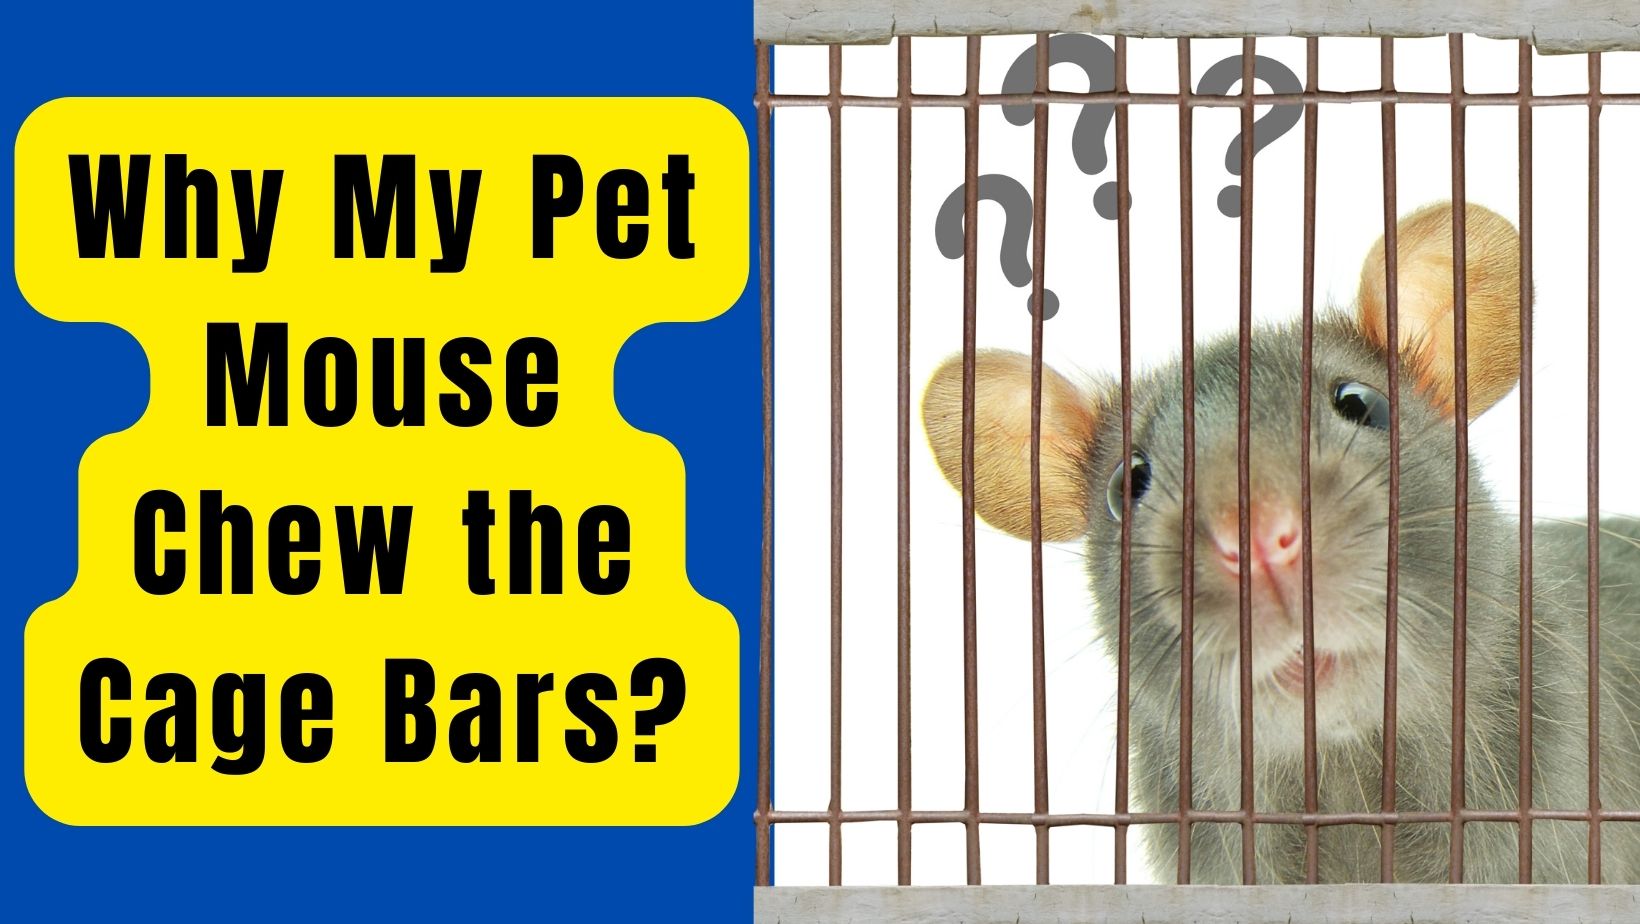 Pet Mouse Chew the Cage Bars? 5 Reasons Why